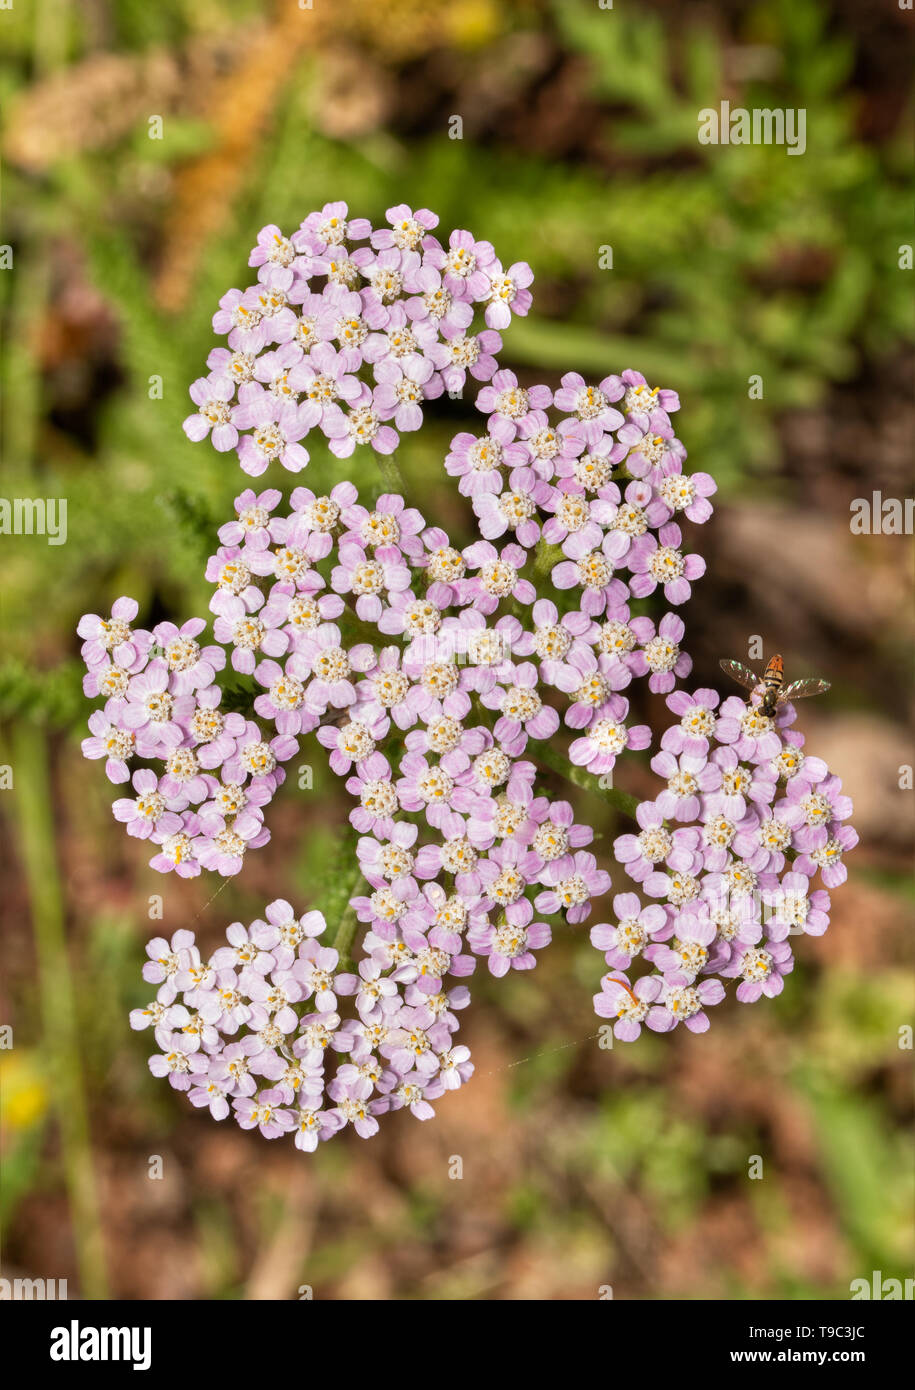 Top view of light pink wild Yarrow flower clusters Stock Photo